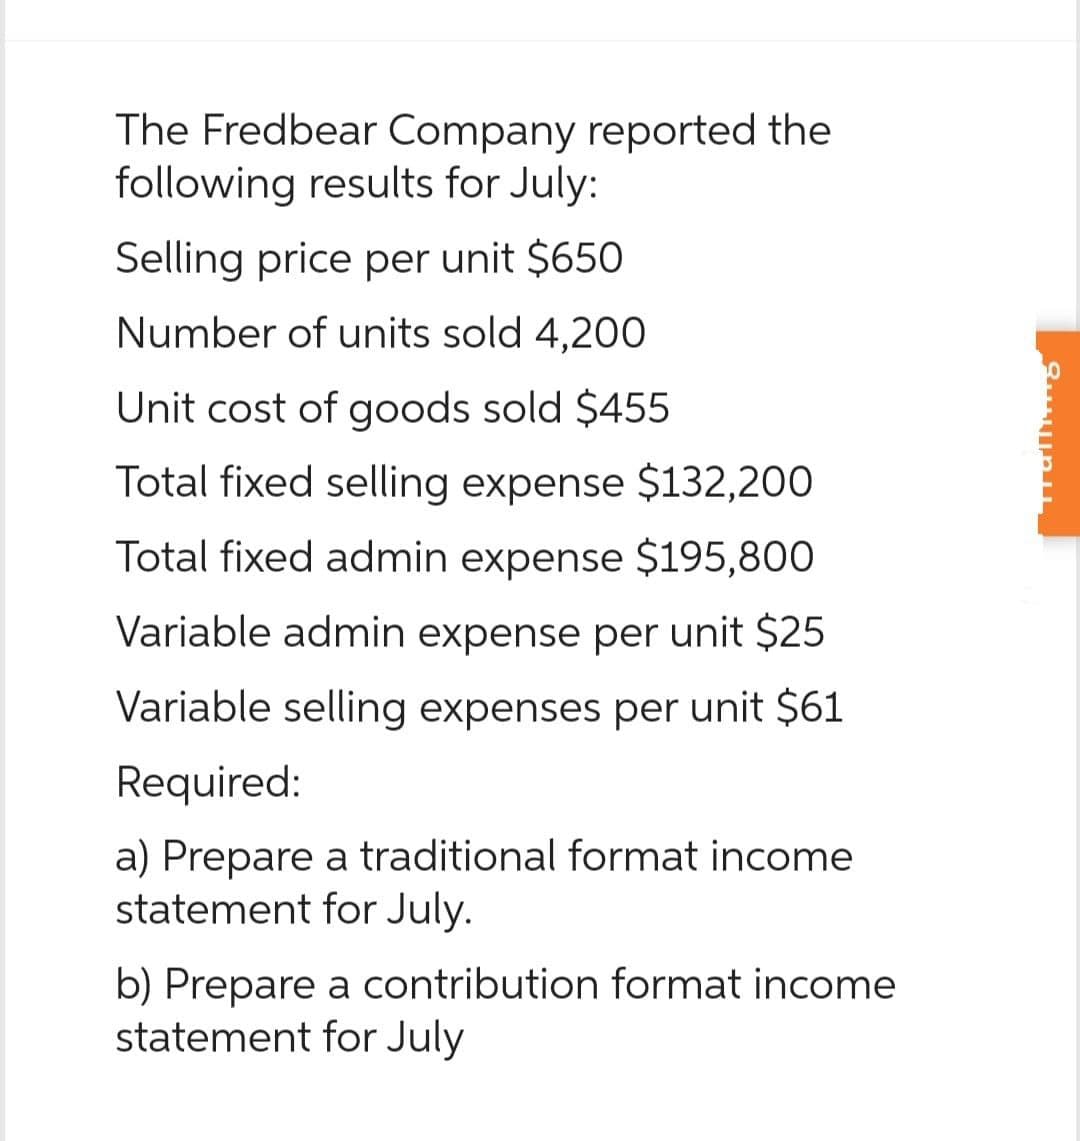 The Fredbear Company reported the
following results for July:
Selling price per unit $650
Number of units sold 4,200
Unit cost of goods sold $455
Total fixed selling expense $132,200
Total fixed admin expense $195,800
Variable admin expense per unit $25
Variable selling expenses per unit $61
Required:
a) Prepare a traditional format income
statement for July.
b) Prepare a contribution format income
statement for July
alling